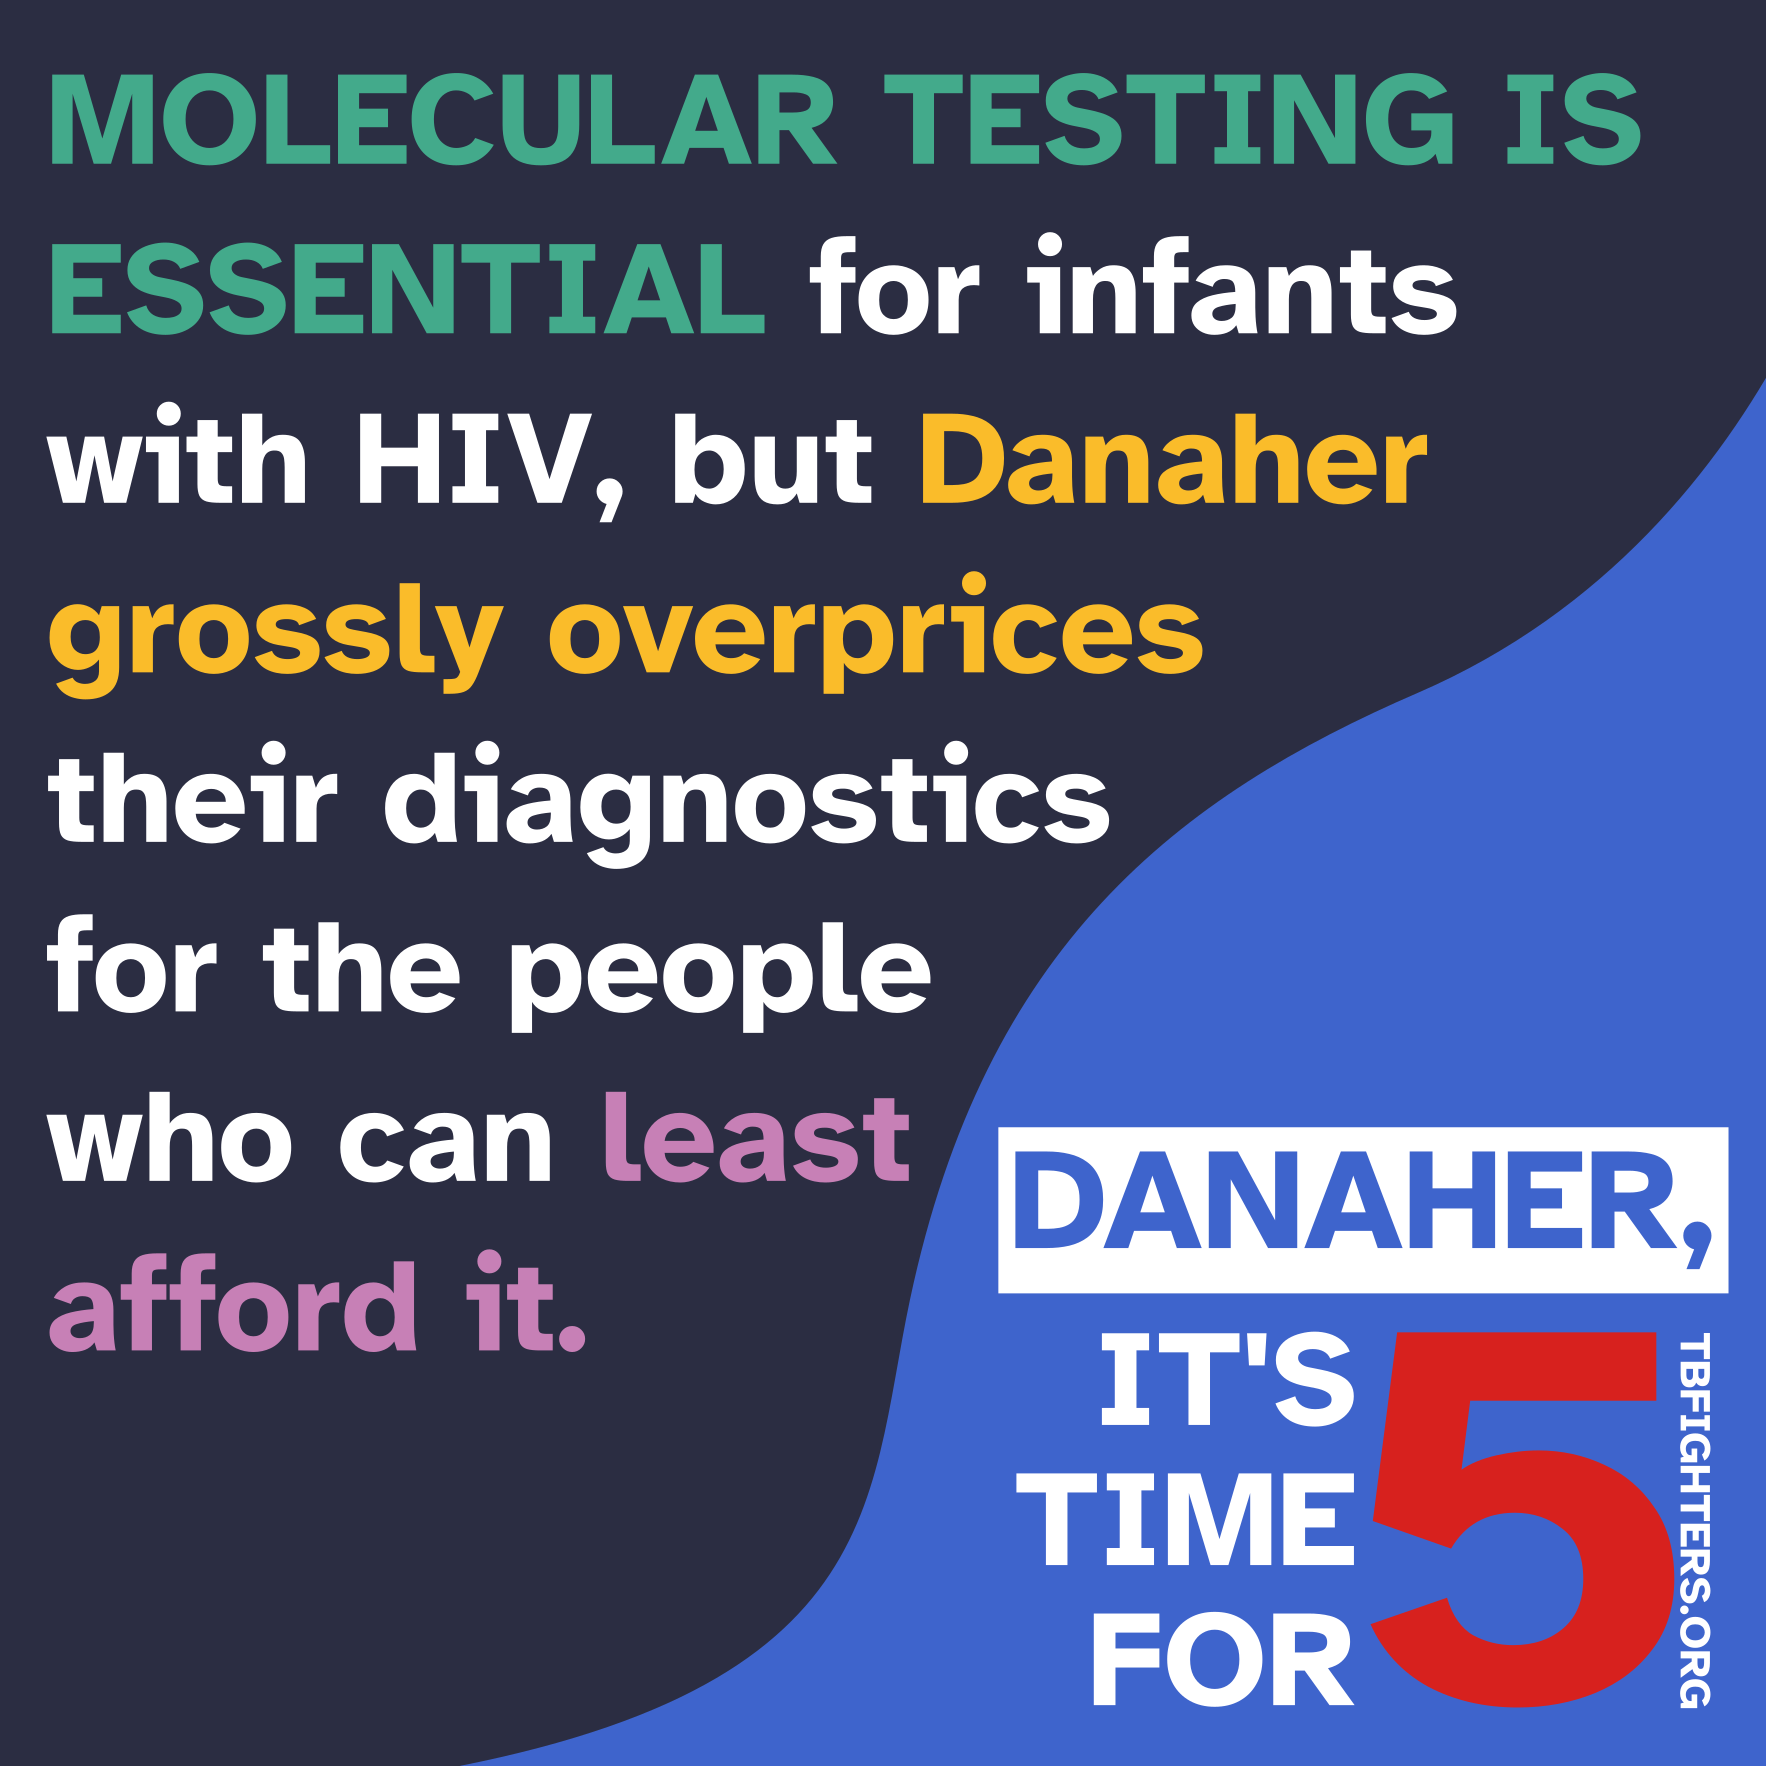 Molecular testing is essential for infants with HIV, but Danaher grossly overprices their diagnostics for the people who can least afford it. Danaher, it’s time for 5. TBFIGHTERS.ORG.